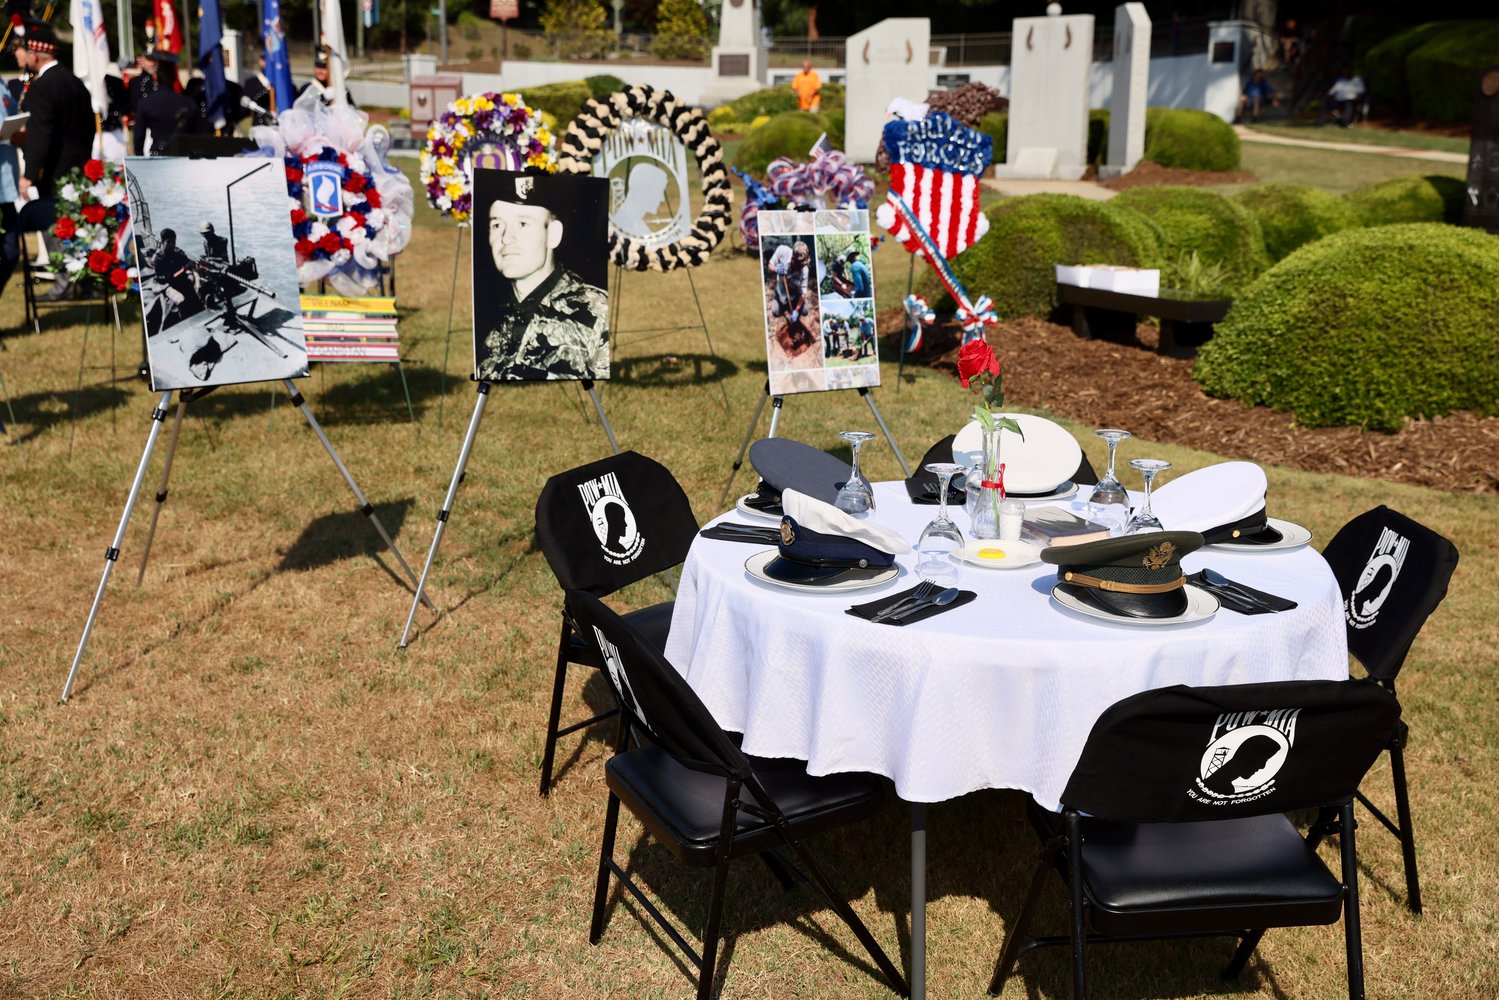 The Missing Man table is on display during the Memorial Day observance on Monday.